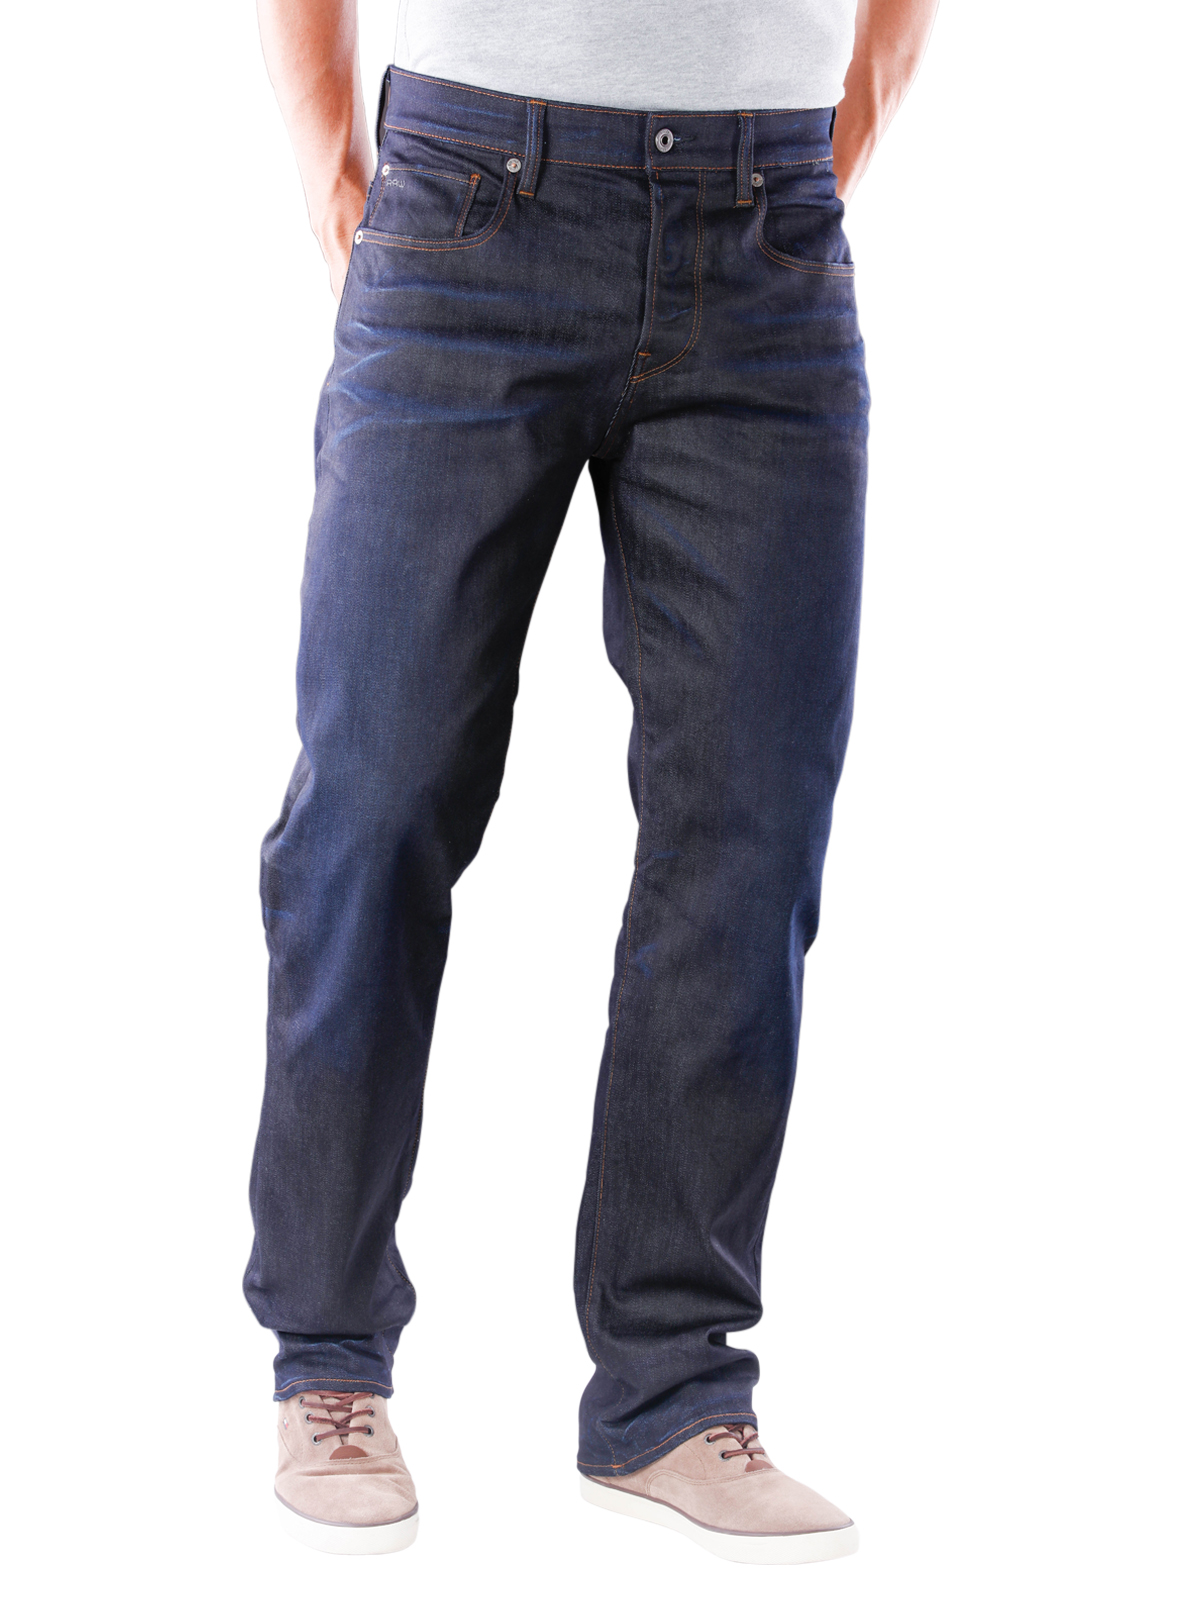 jeans g-star 3301 homme